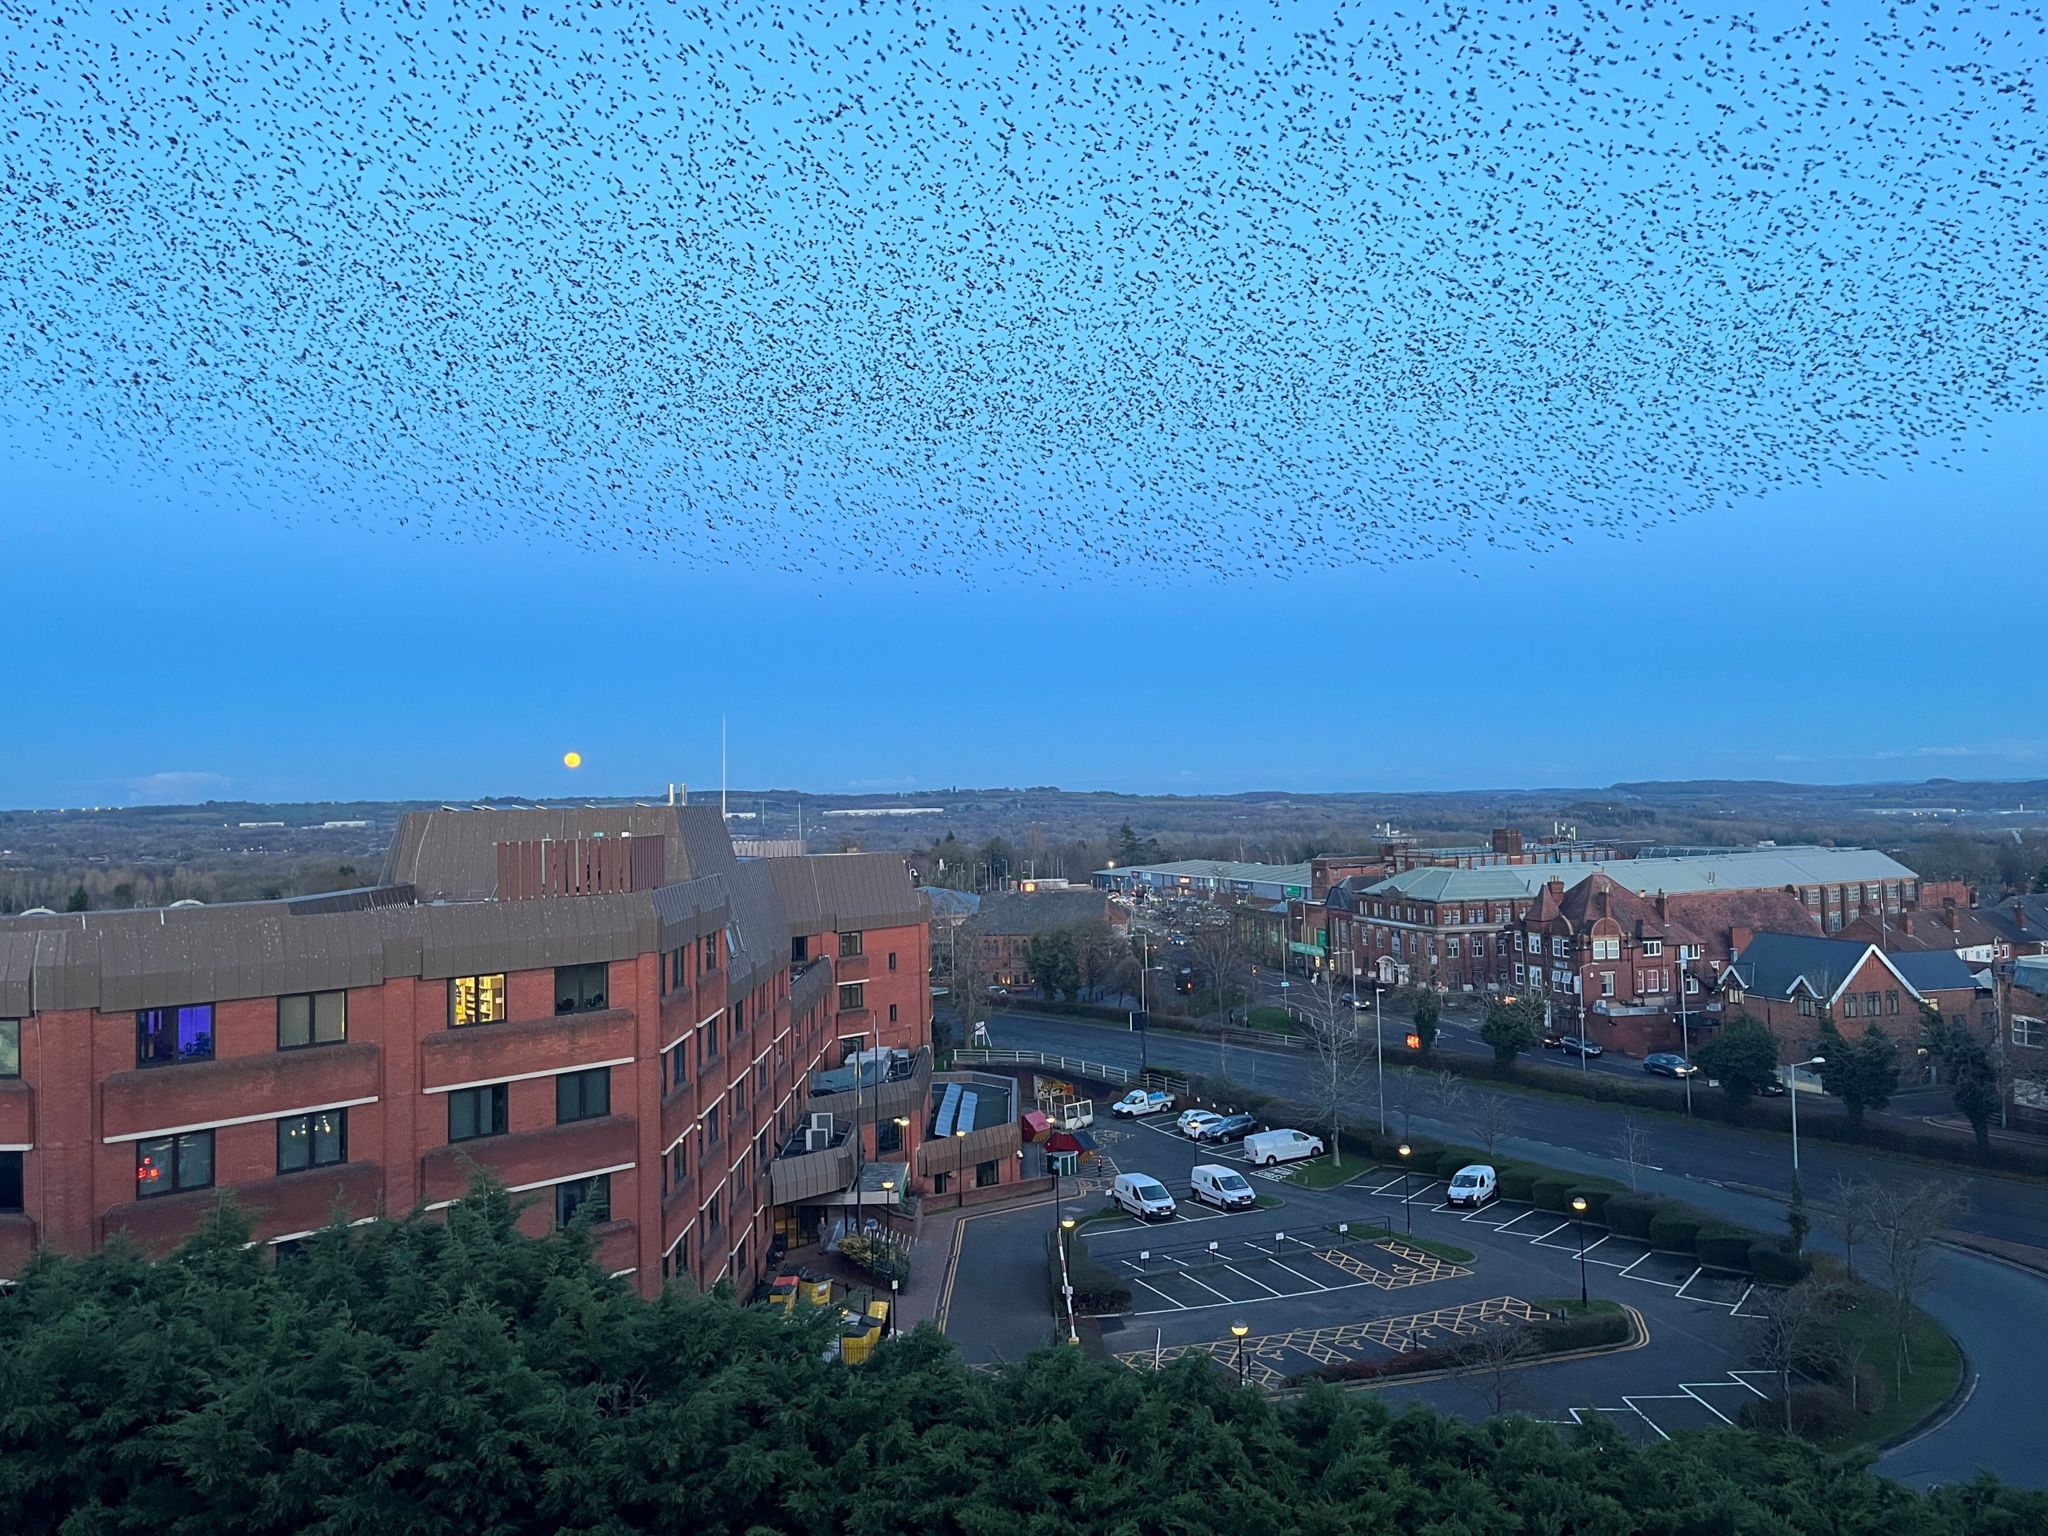 The murmuration over the skyline of Redditch